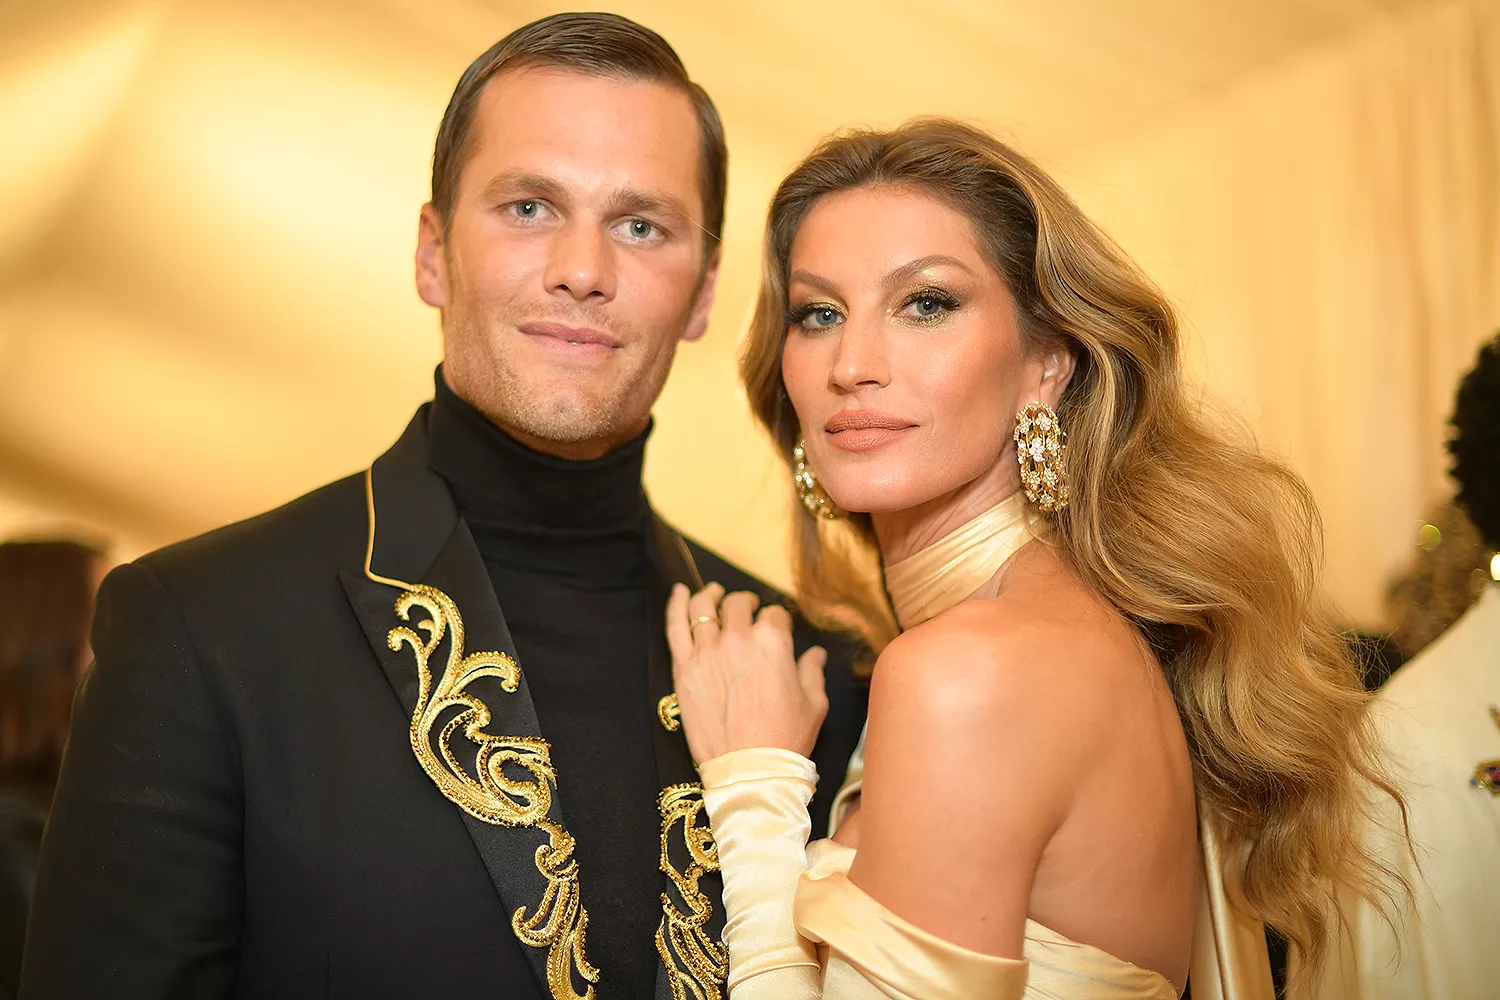 Gisele Bündchen Rubbishes Rumors of Her Cheating on Tom Brady : “It’s a Lie!”